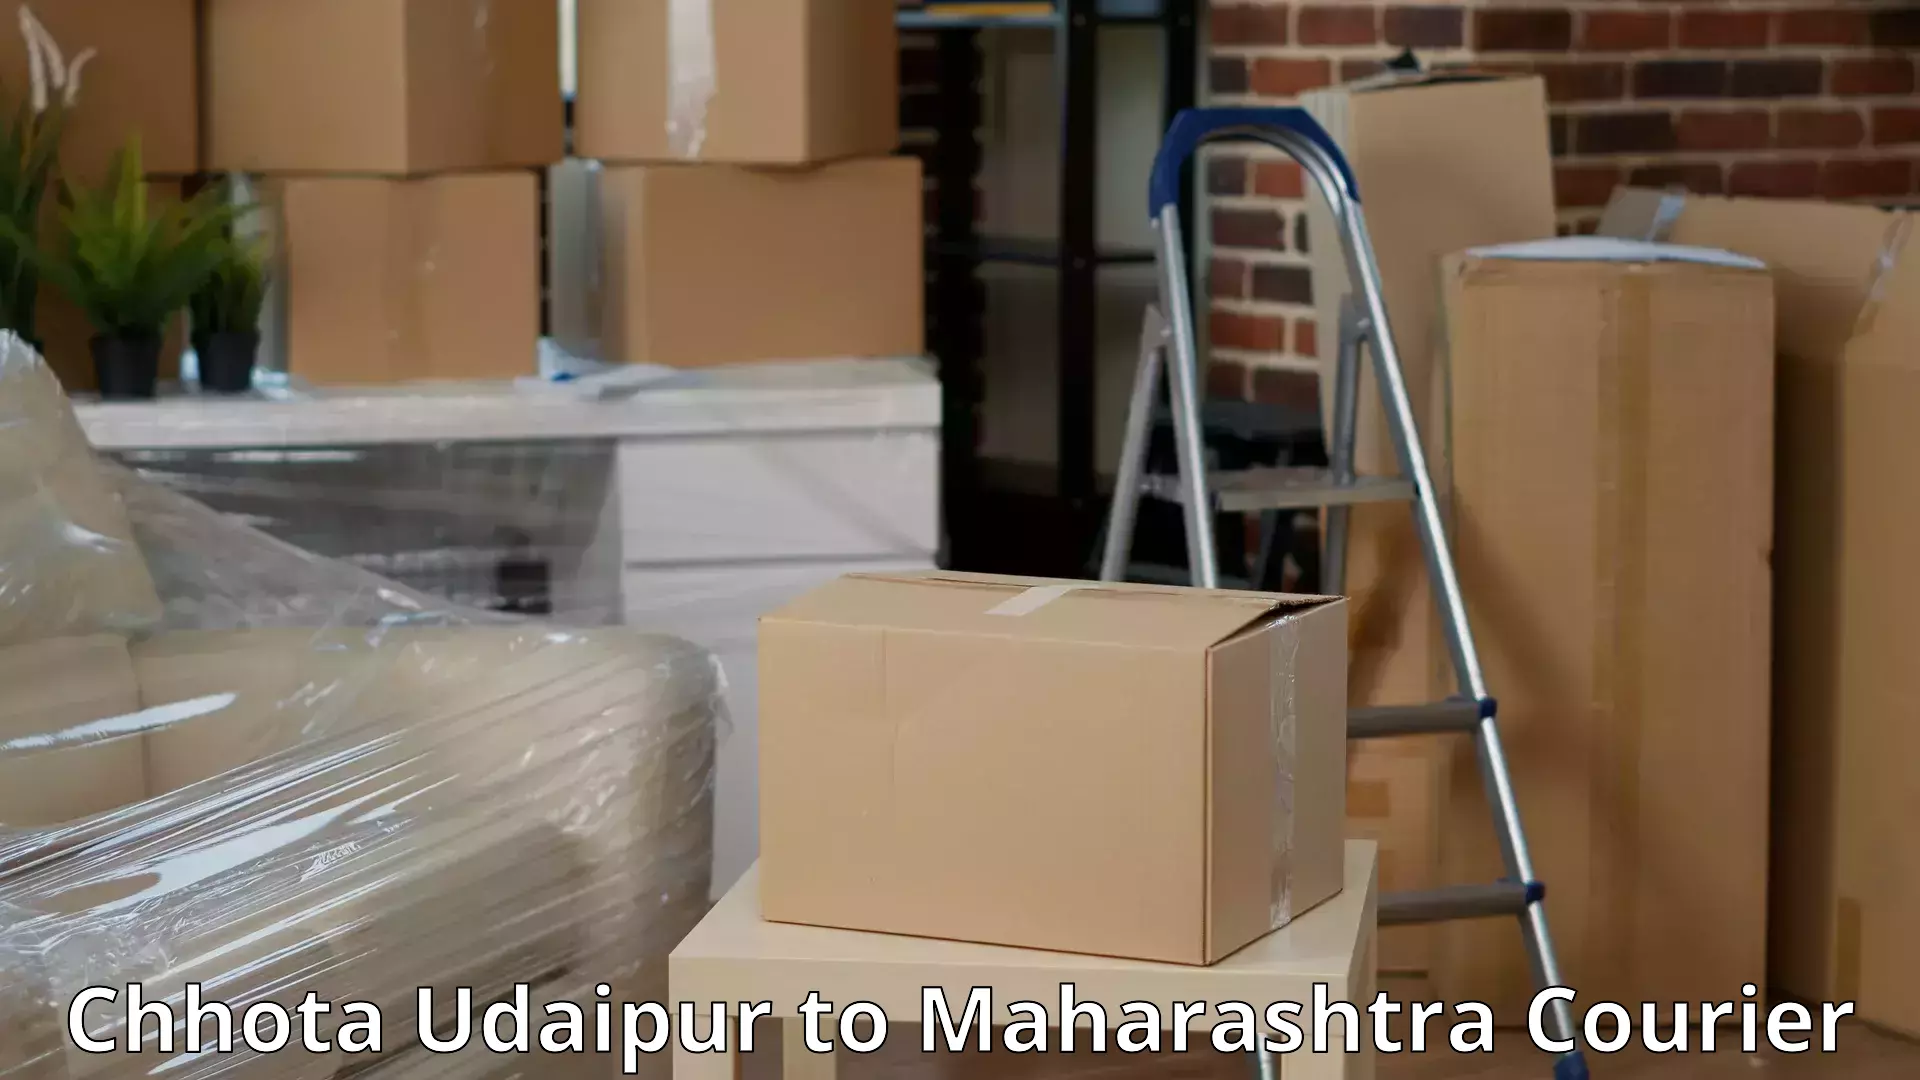 Packing and moving services Chhota Udaipur to Bhandara